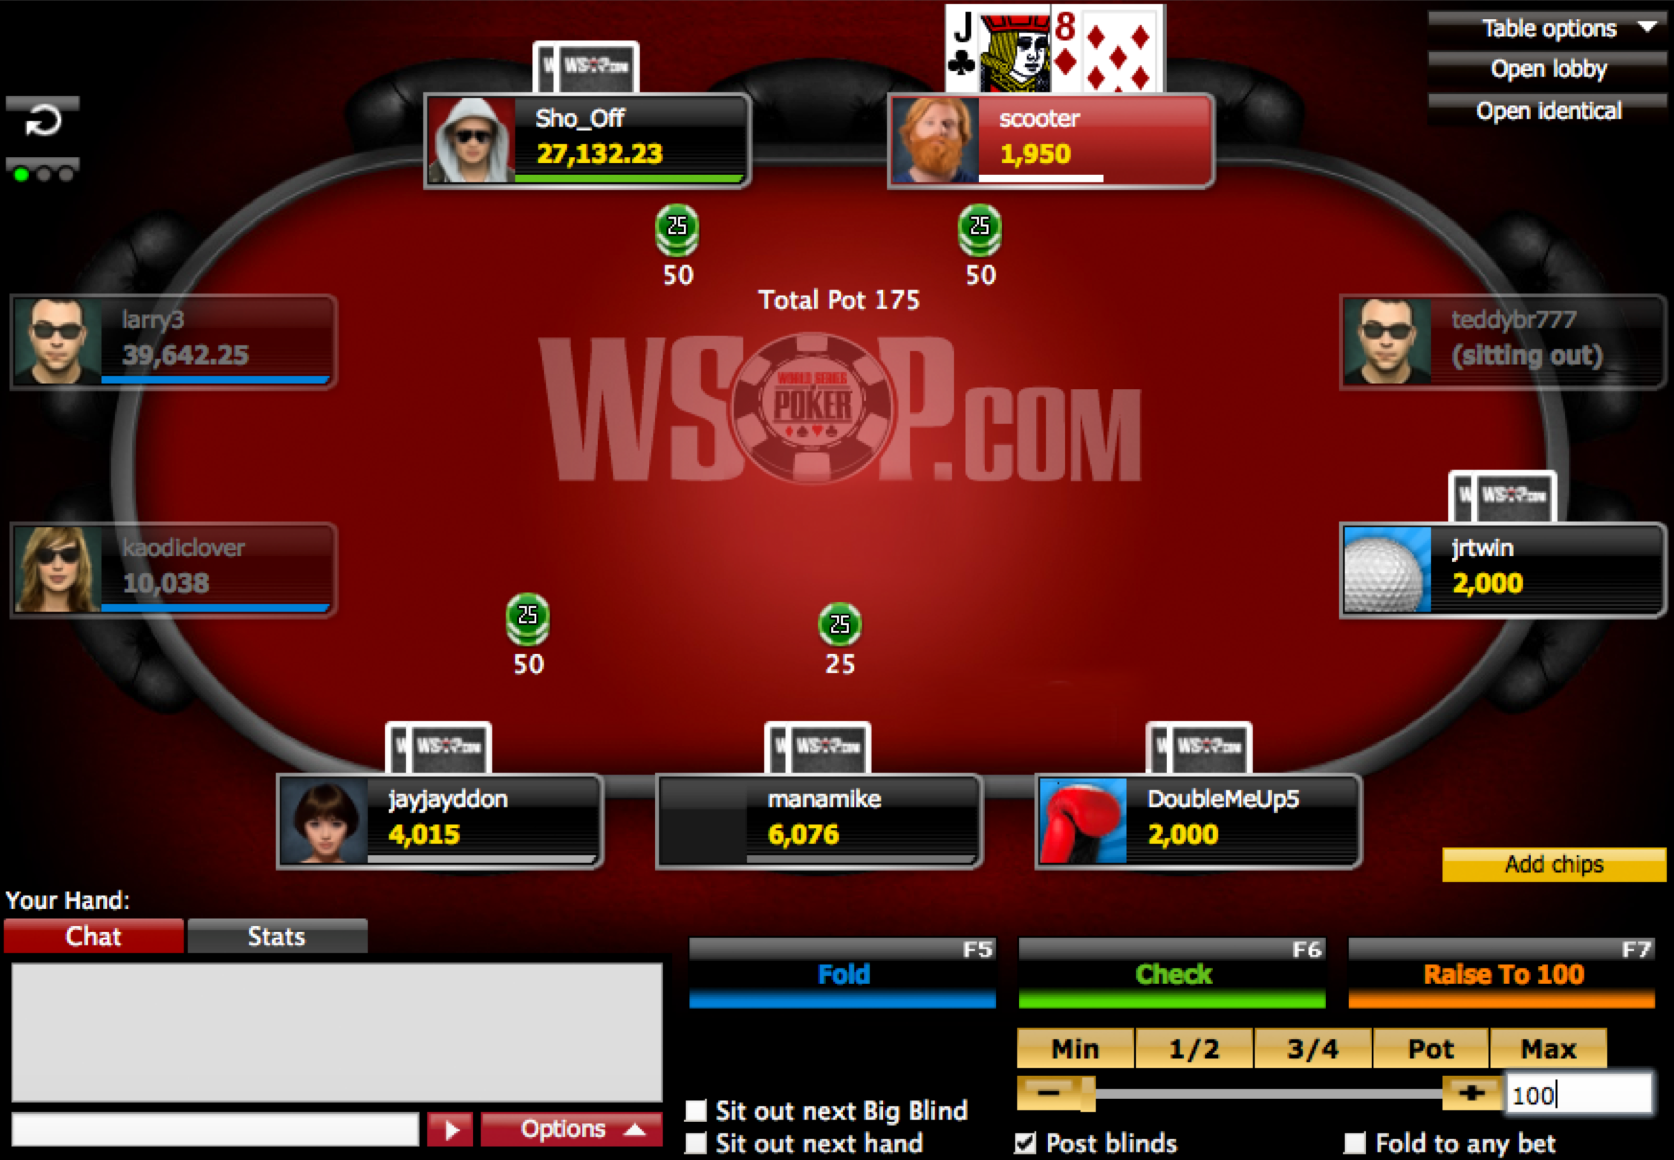 WSOP.com Poker Review for New Jersey and Nevada